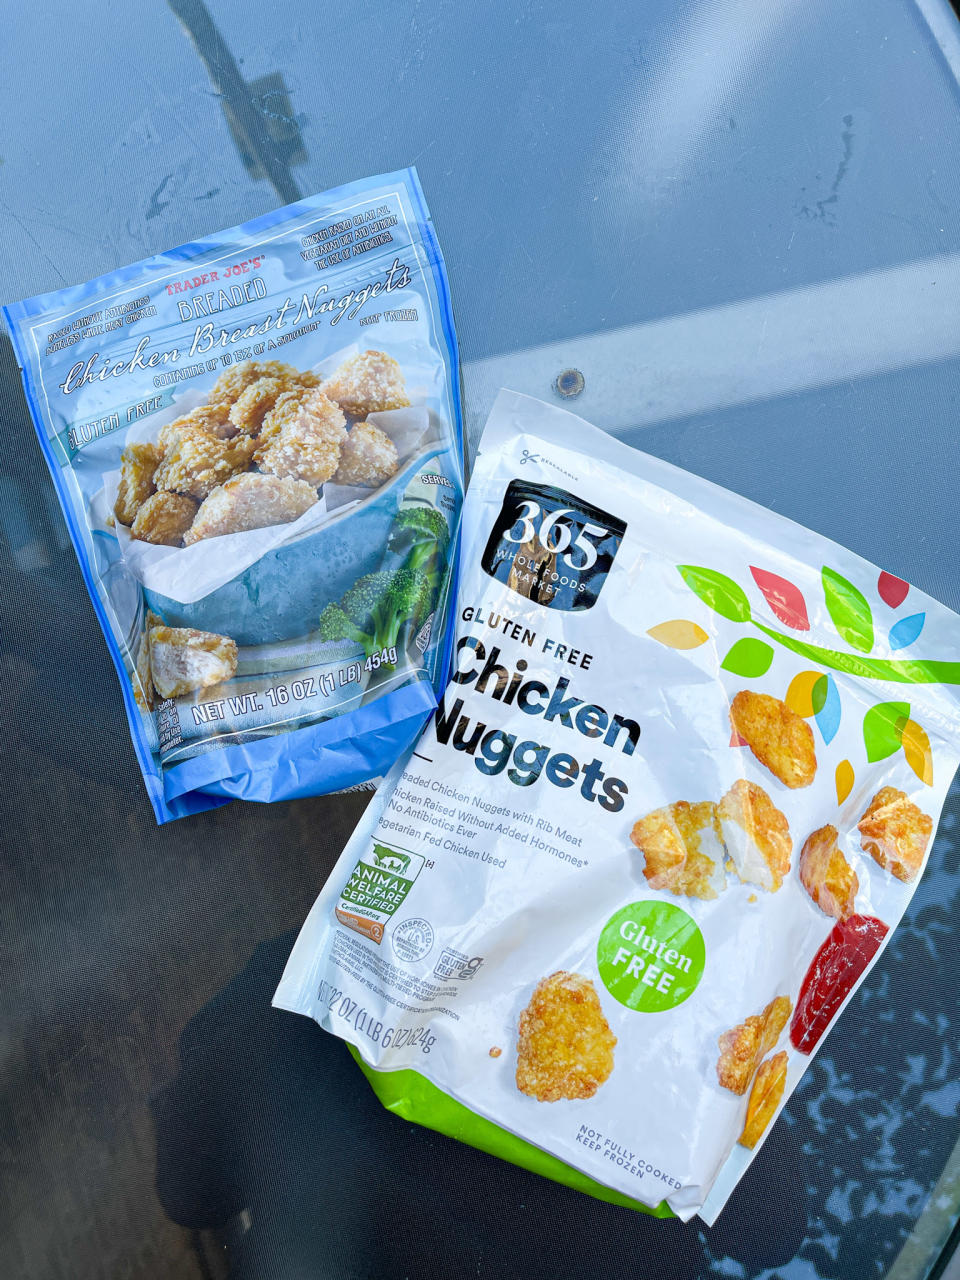 • Trader Joe's Chicken Breast Nuggets• Whole Foods 365 Gluten Free Chicken Nuggets (Note: These are the only chicken nuggets manufactured as part of Whole Foods' generic line — and they just so happen to be gluten-free.)